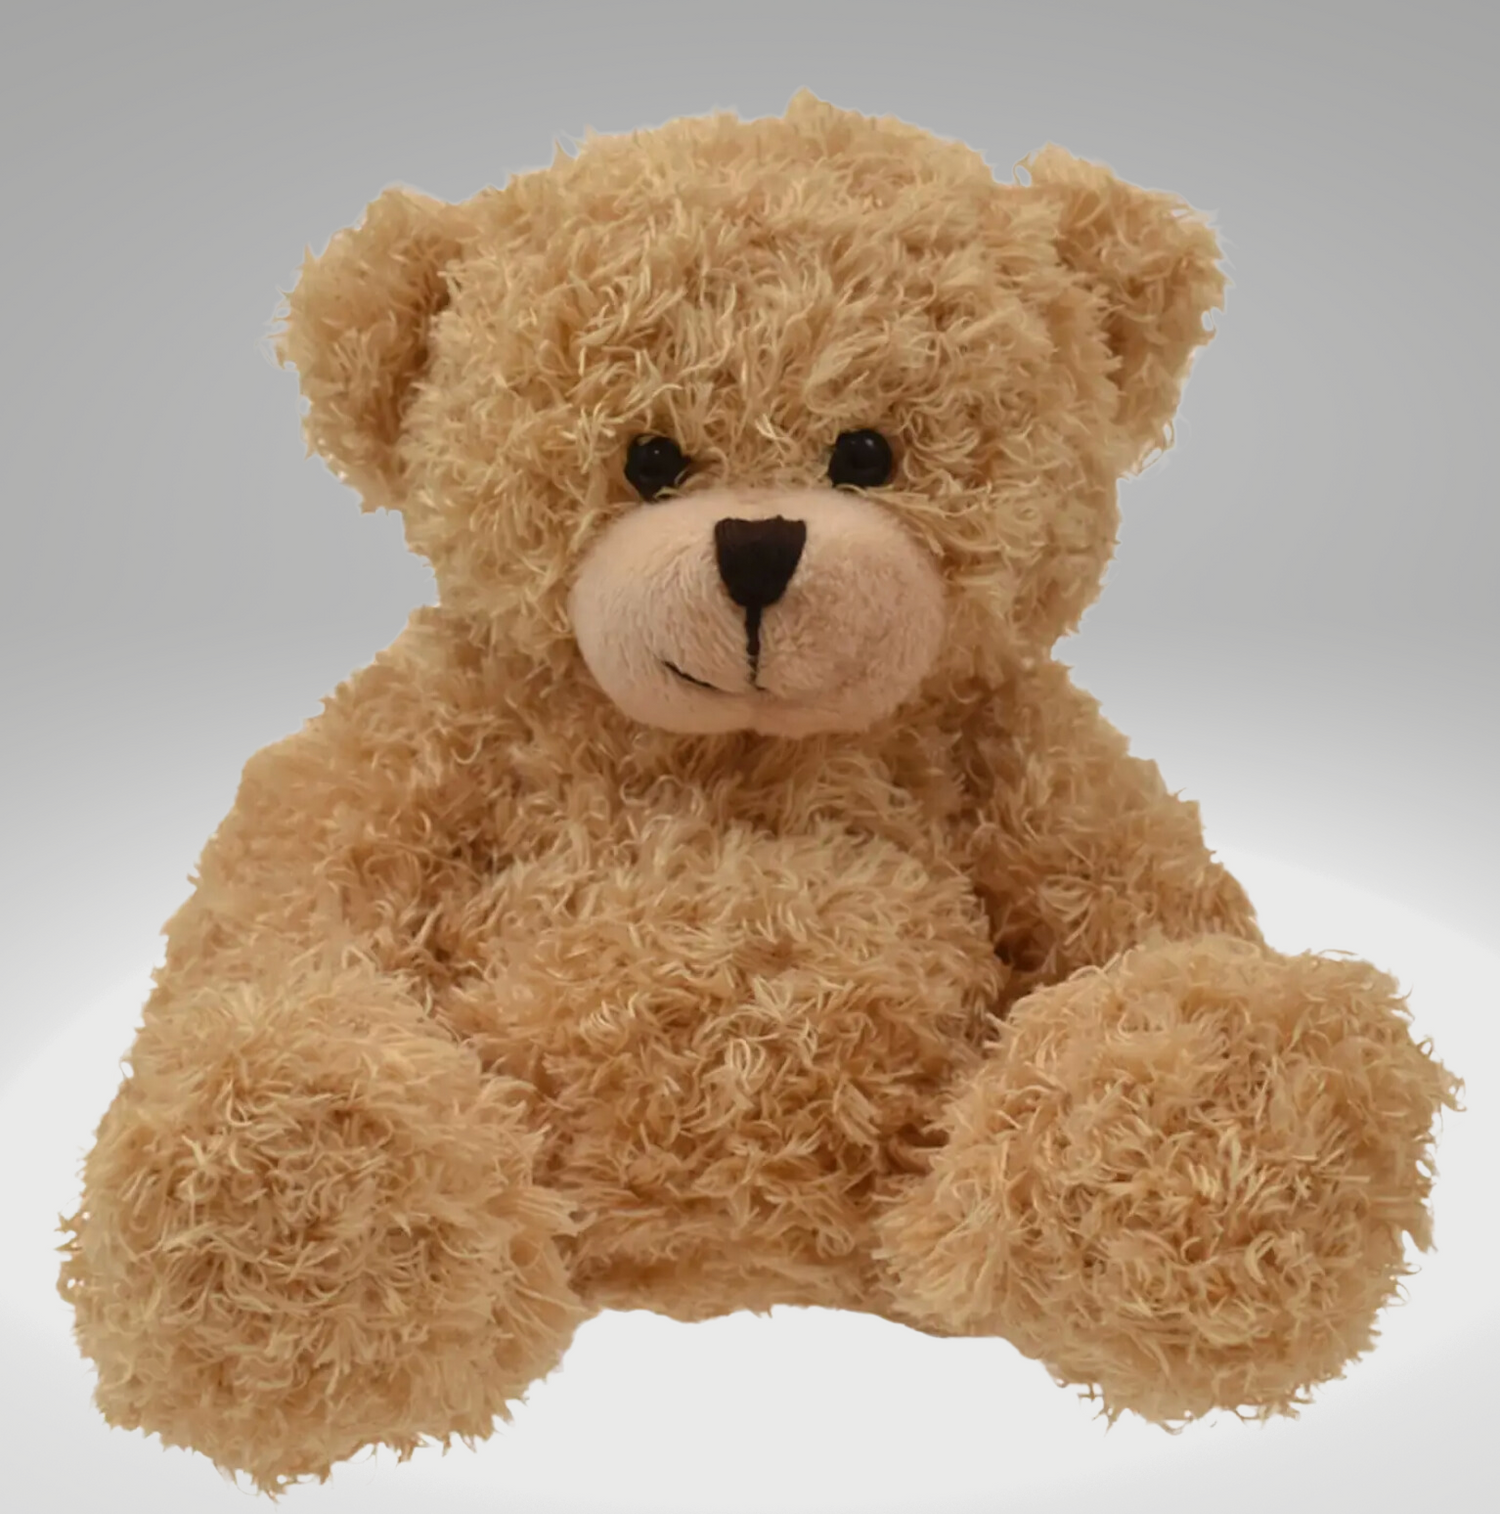 Sweet and Soft Teddy Bear- As part of the little pal gift box